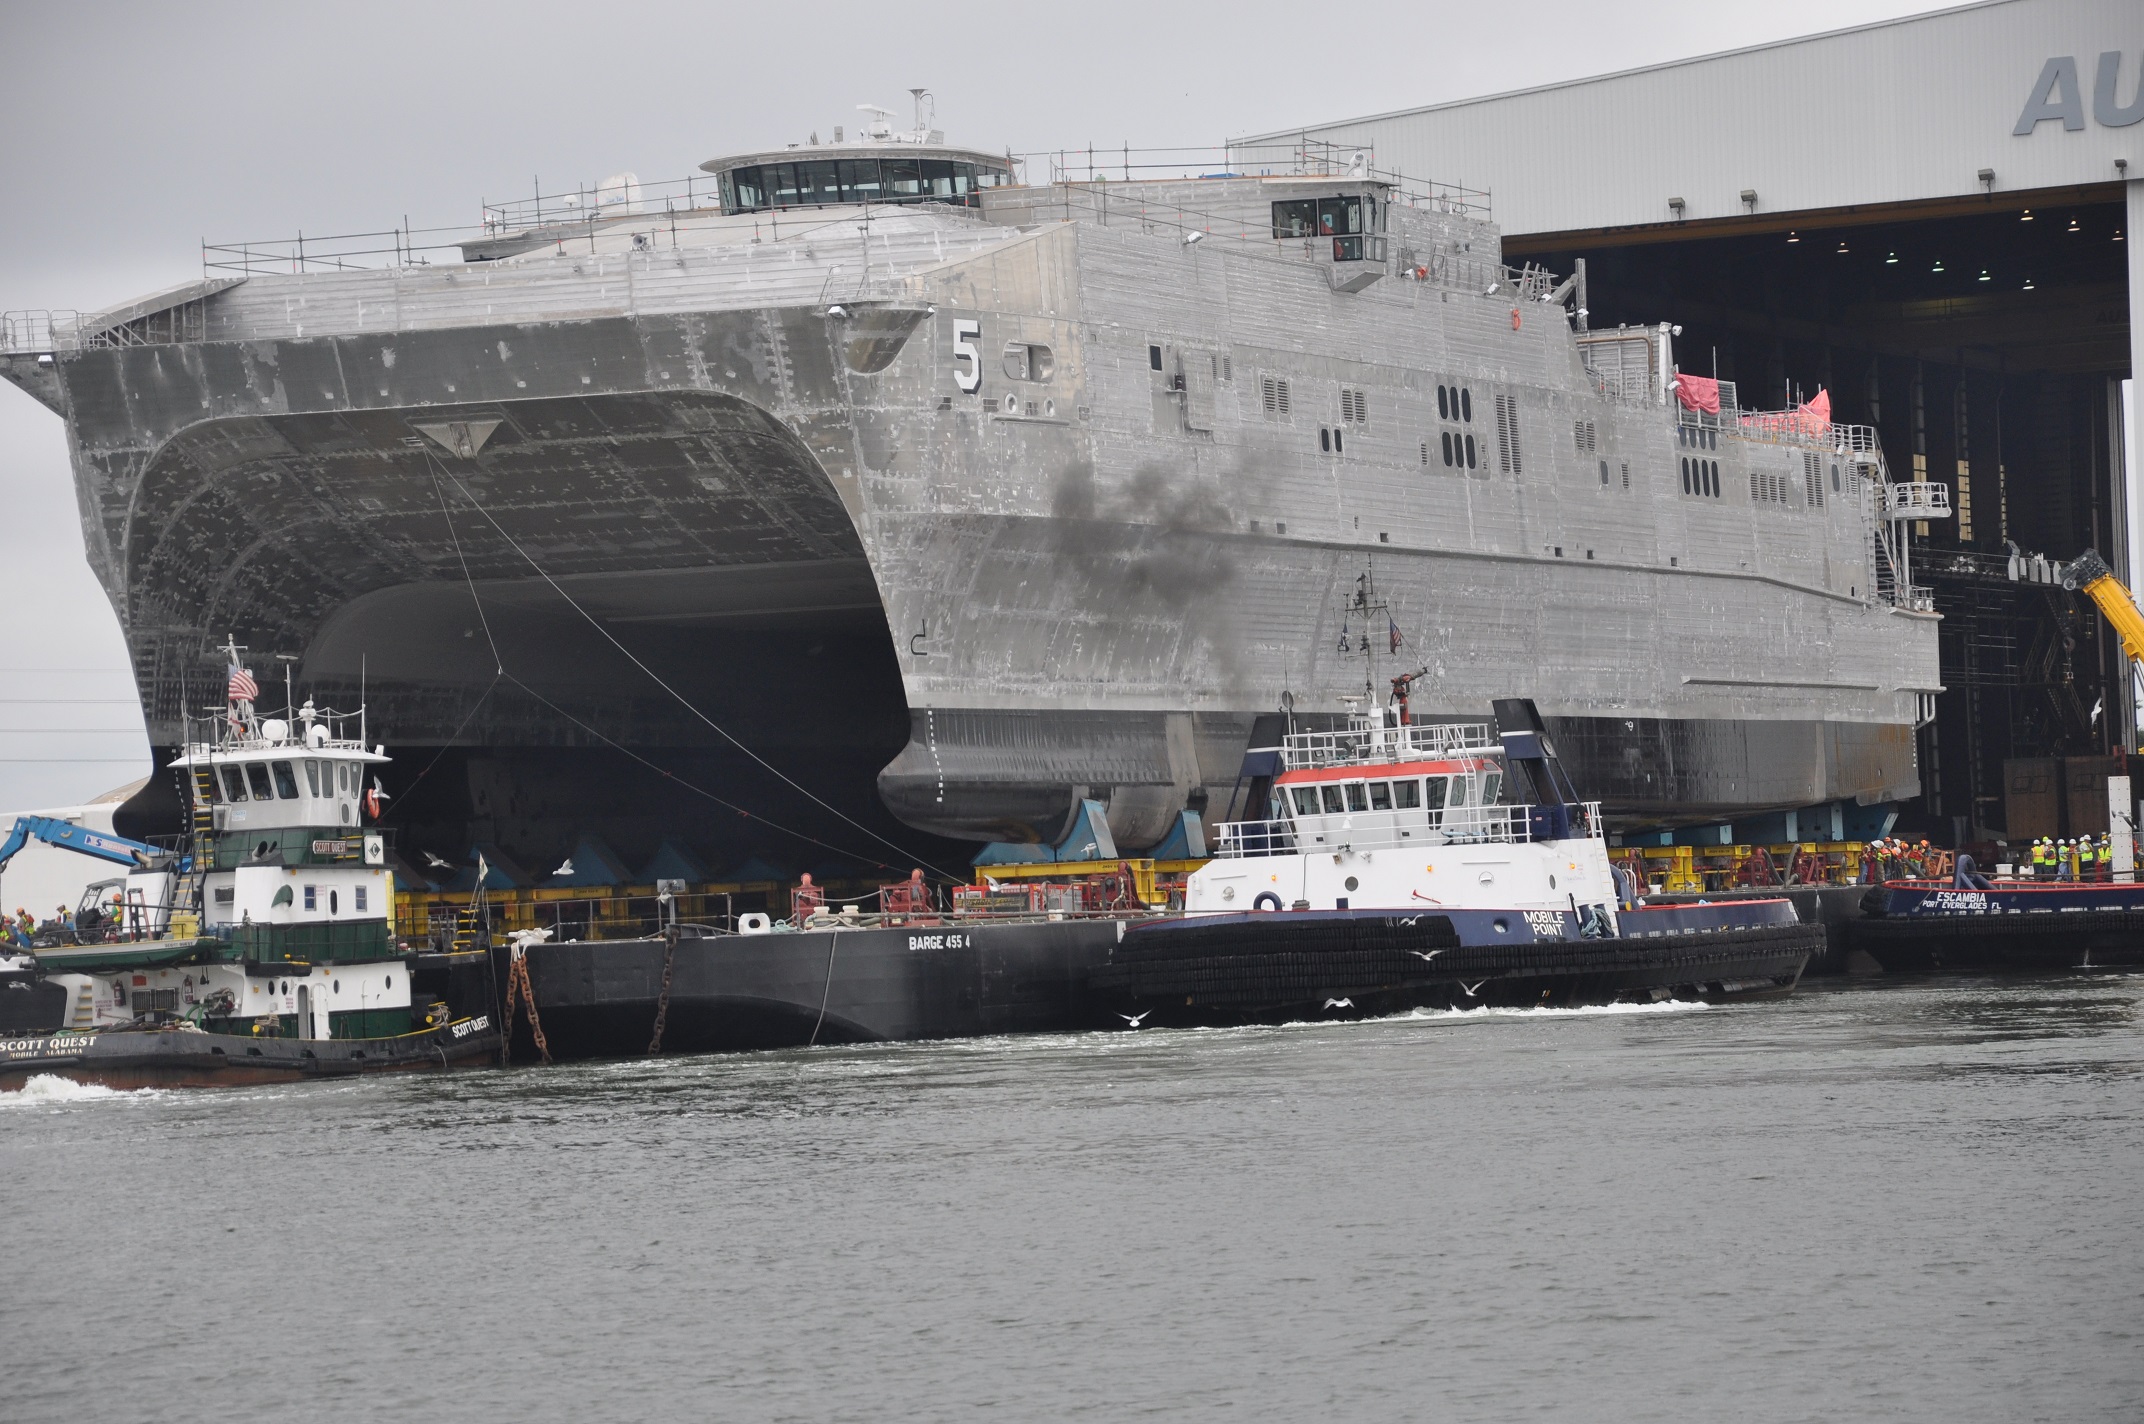 USNS Trenton (JHSV 5) rolls out in preparation for launch at Austal USA shipyard on Sept. 30, 2014. US Navy Photo